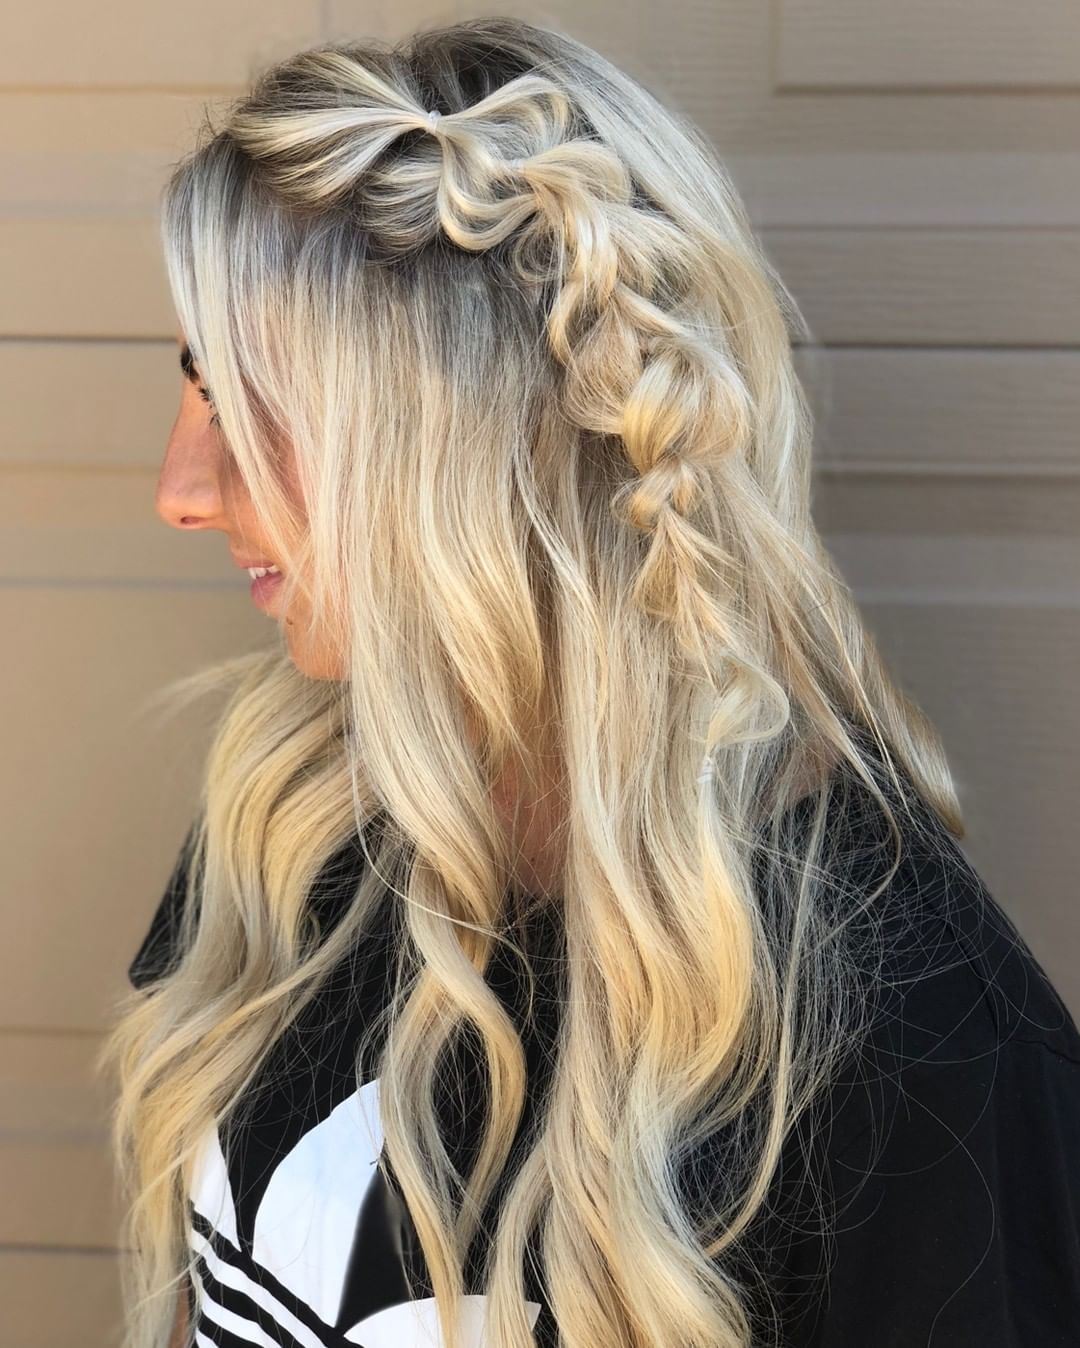 Get Inspired by These Long Braided Hairstyles